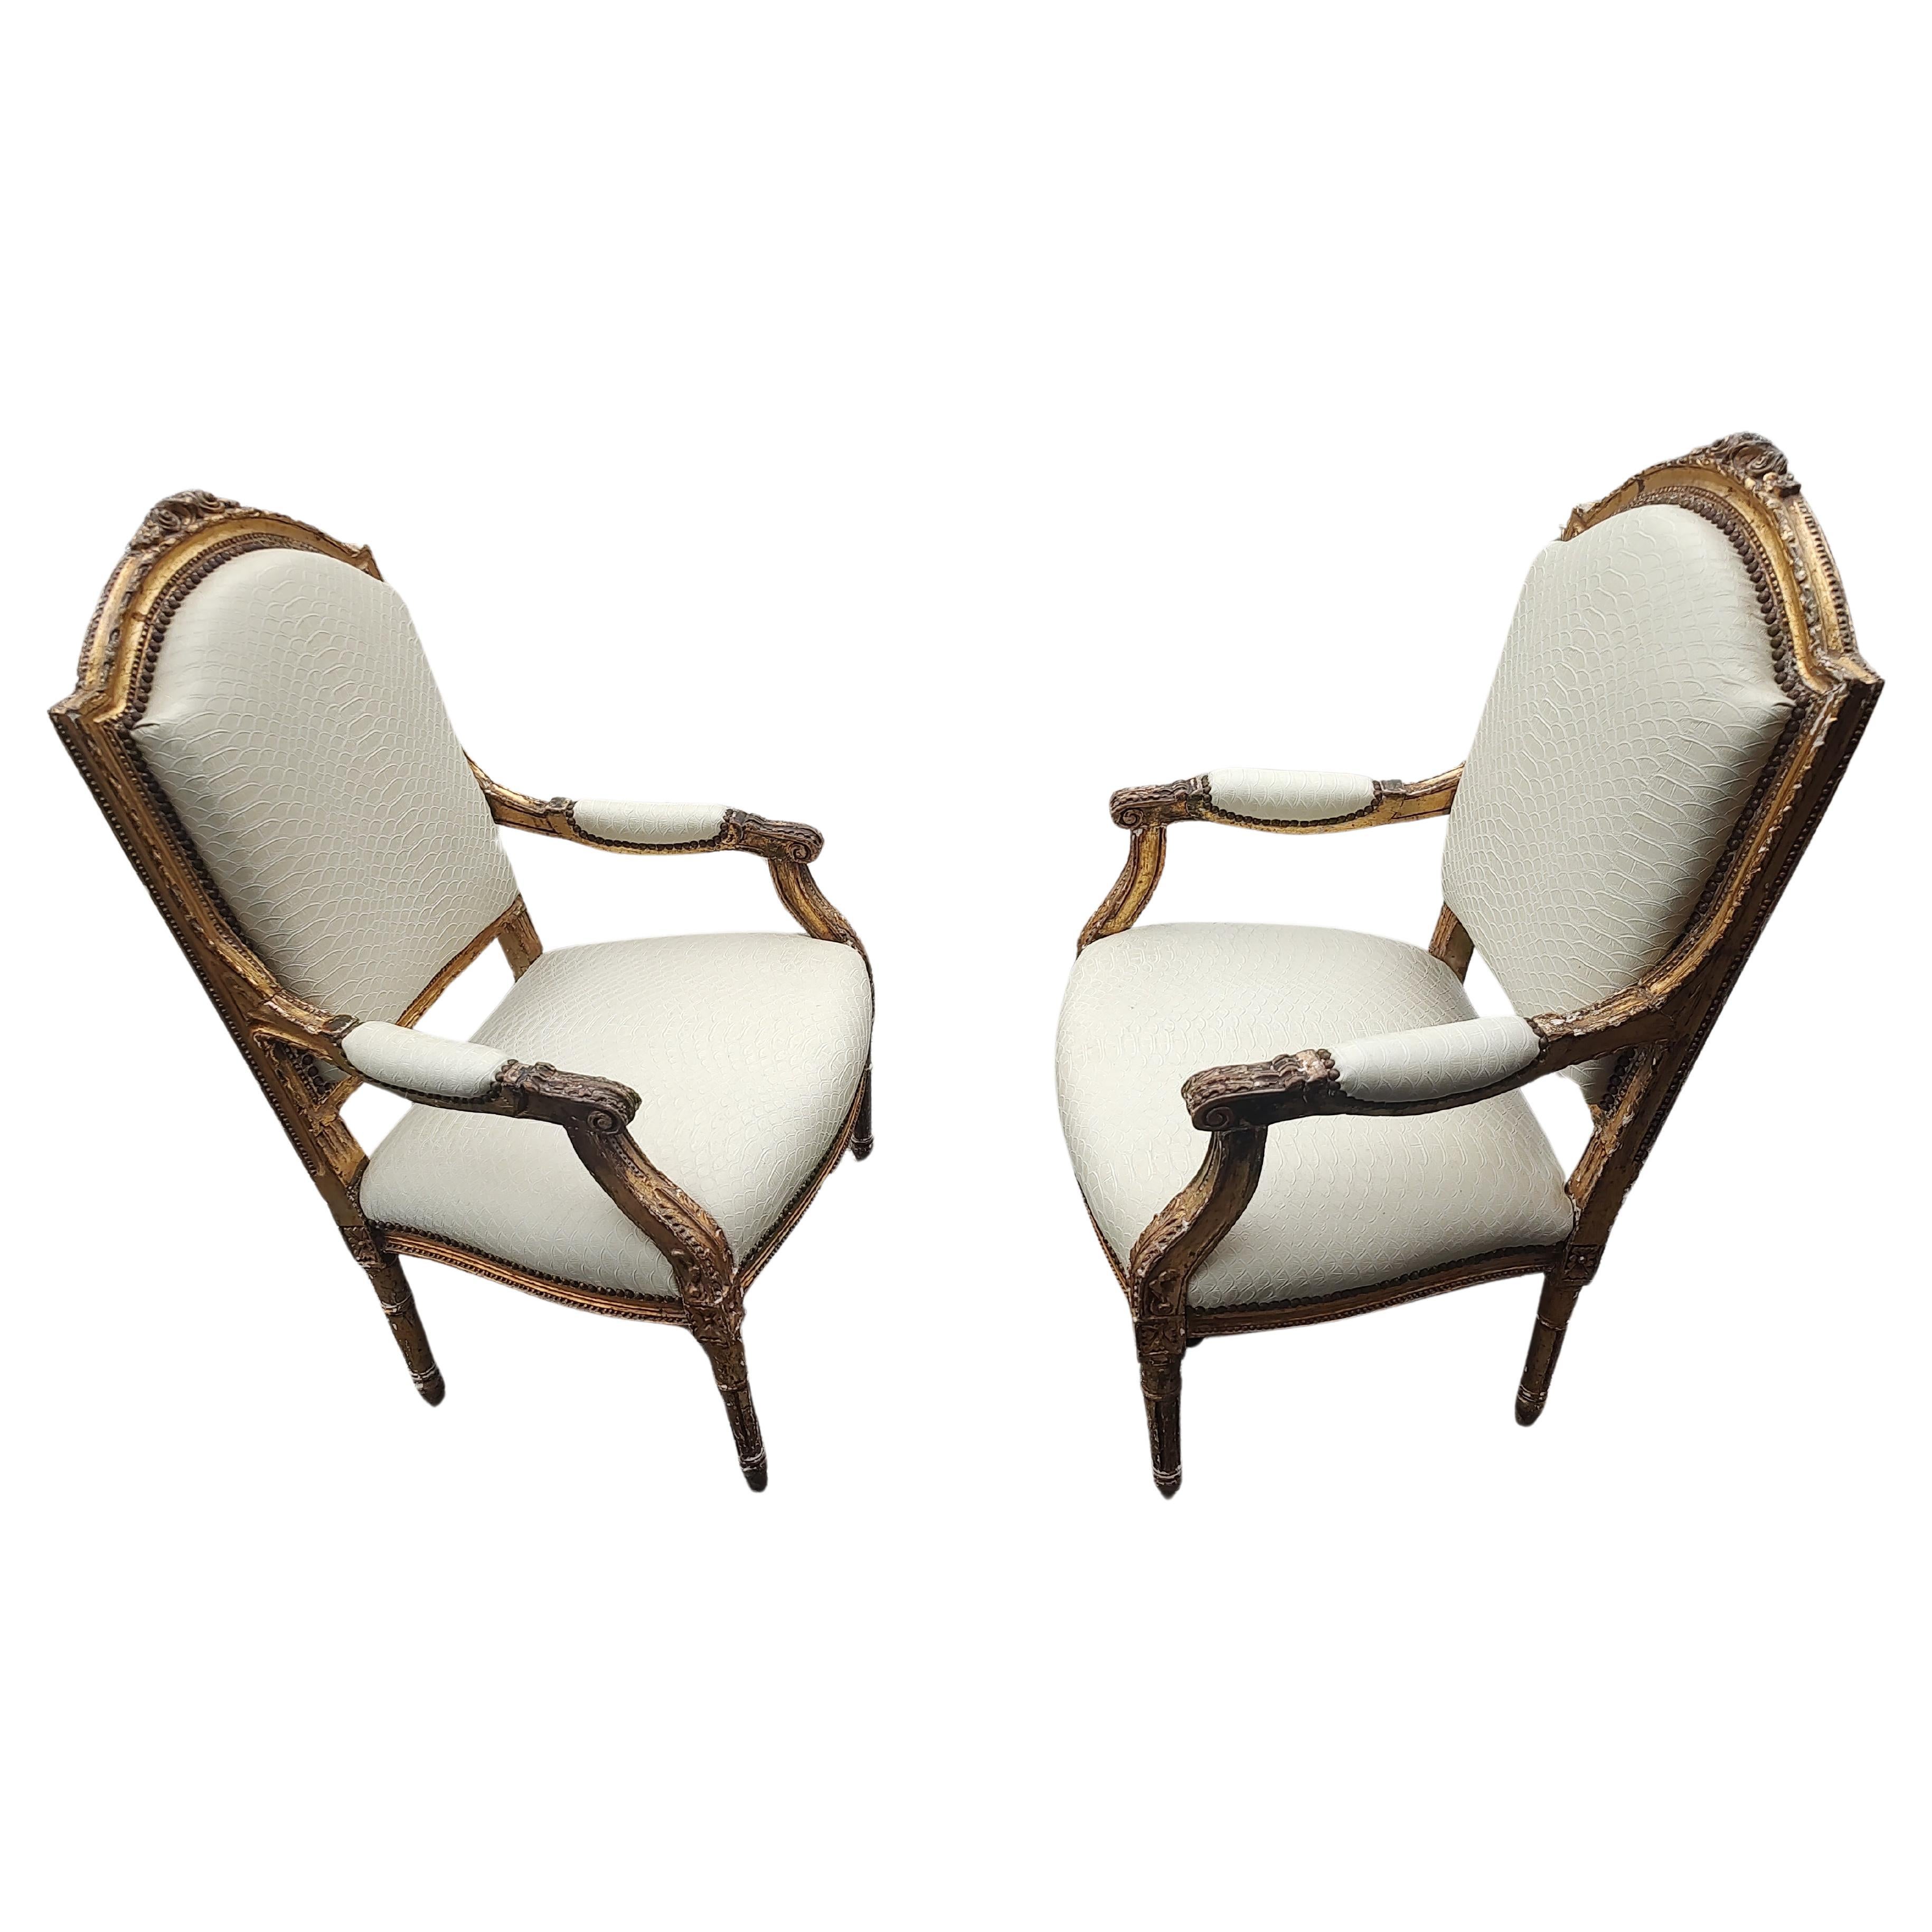 Pair of Mid 18th Century Gilt French Armchairs Fauteuils For Sale